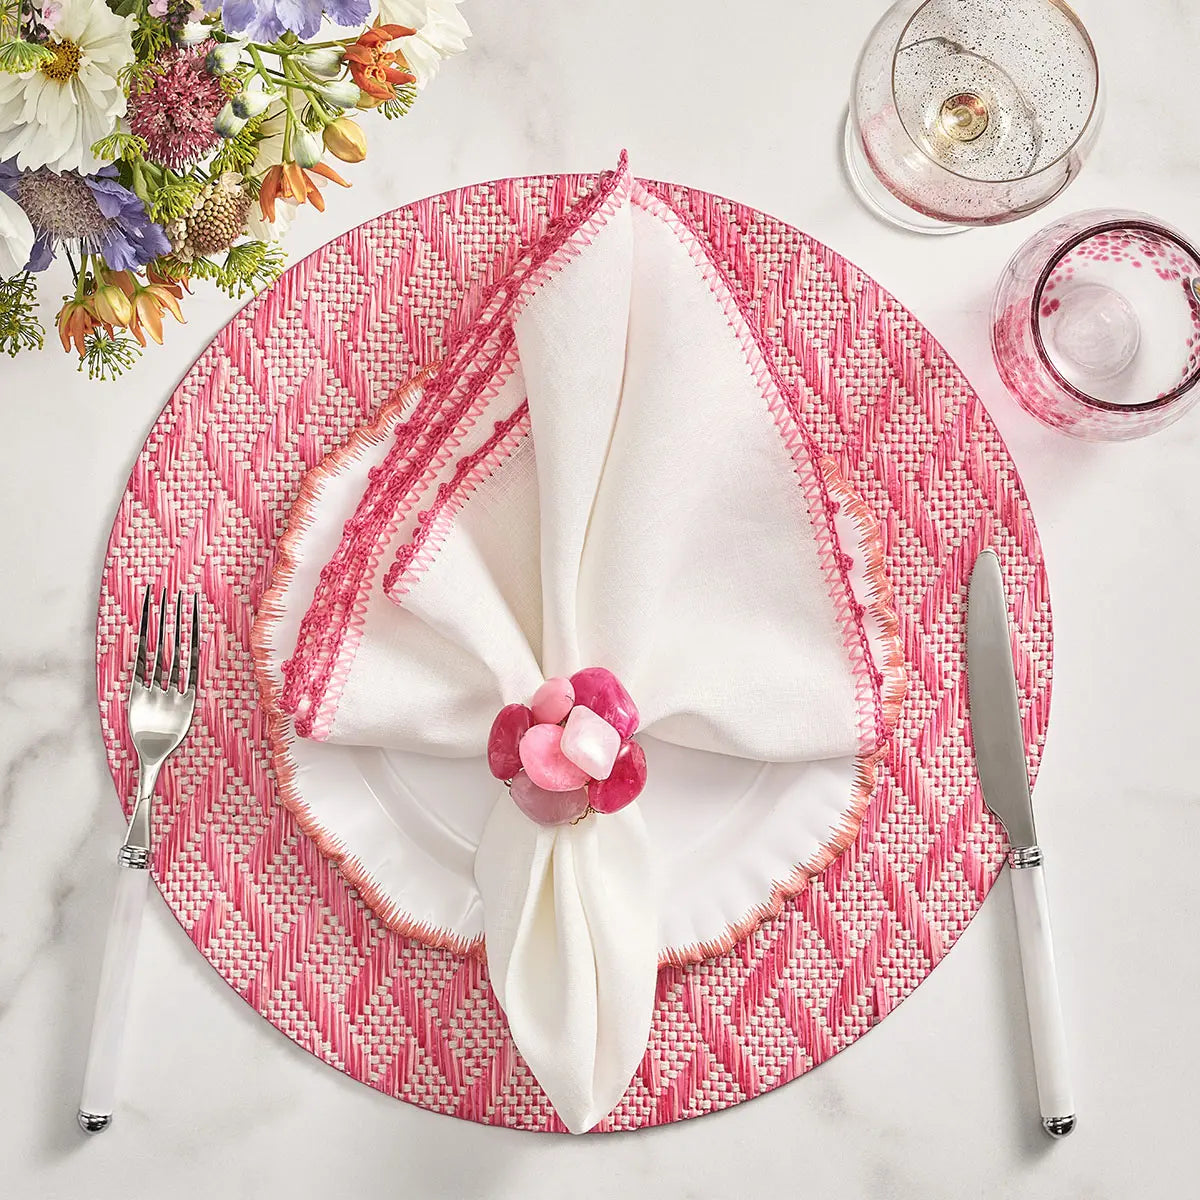 Kim Seybert Knotted Edge Napkin in White Pink and Blush set on a table